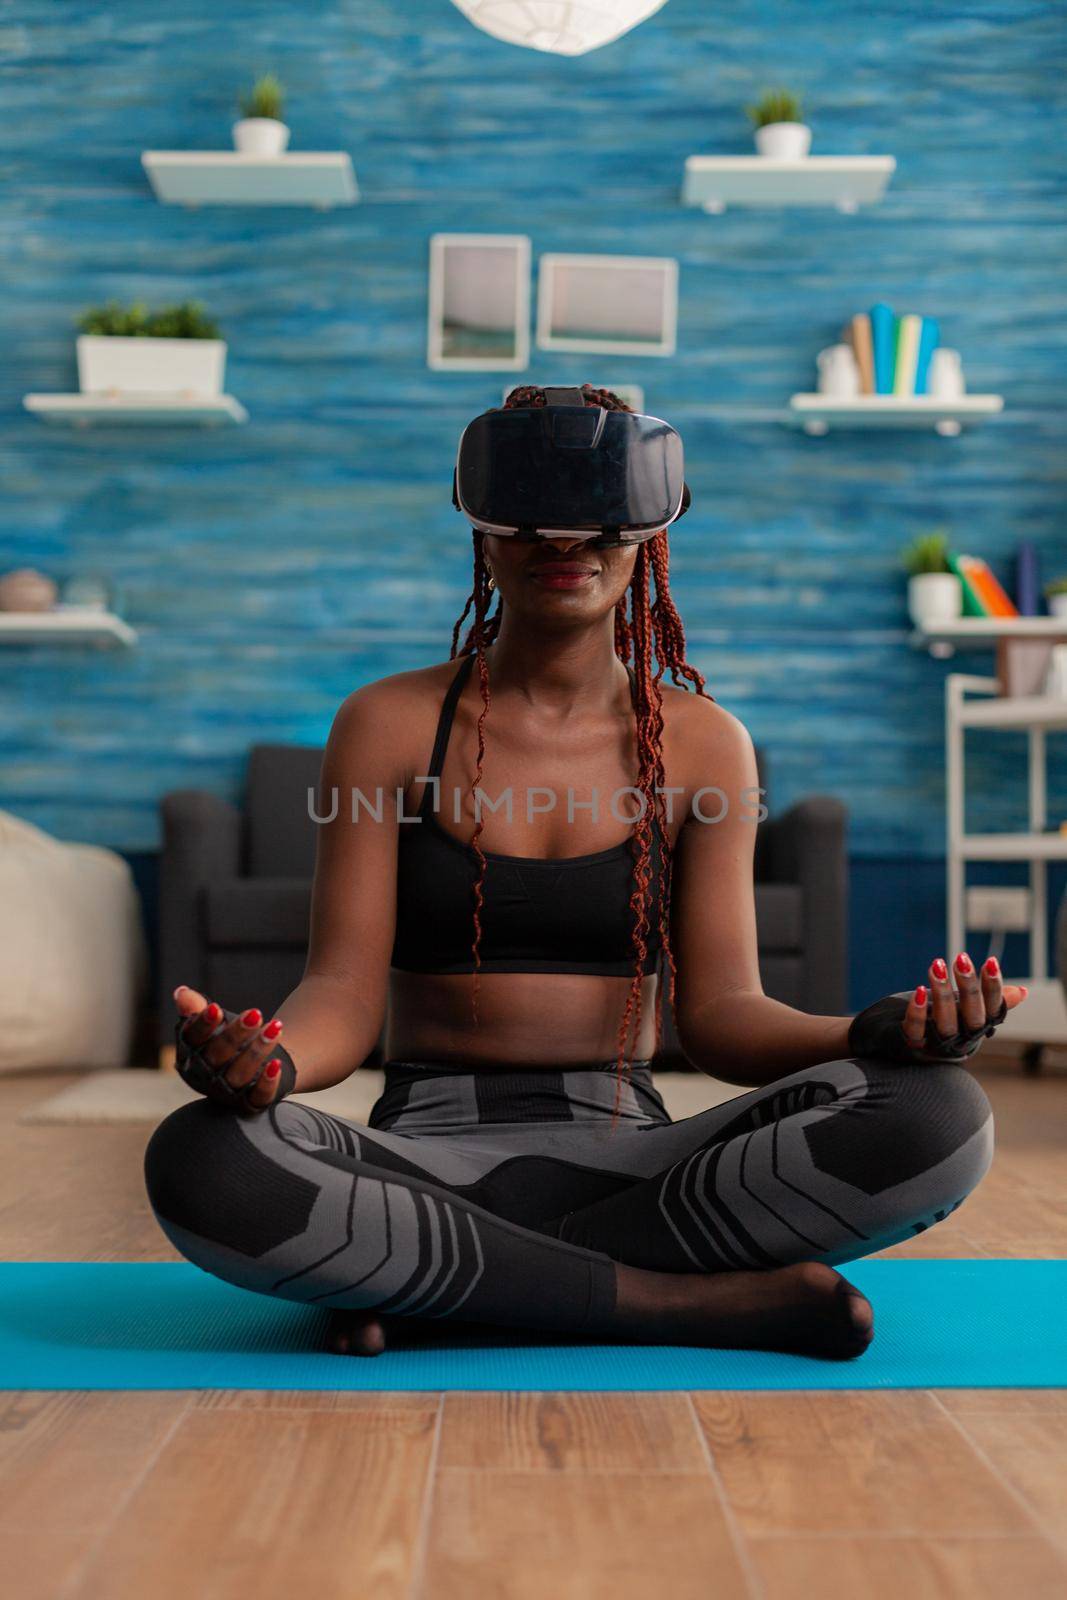 Calm tranquil black woman wearing vritual reality goggles sitting on yoga mat, spending time on spirituality healthy lifestyle. Practicing meditating in lotus pose in home living room.